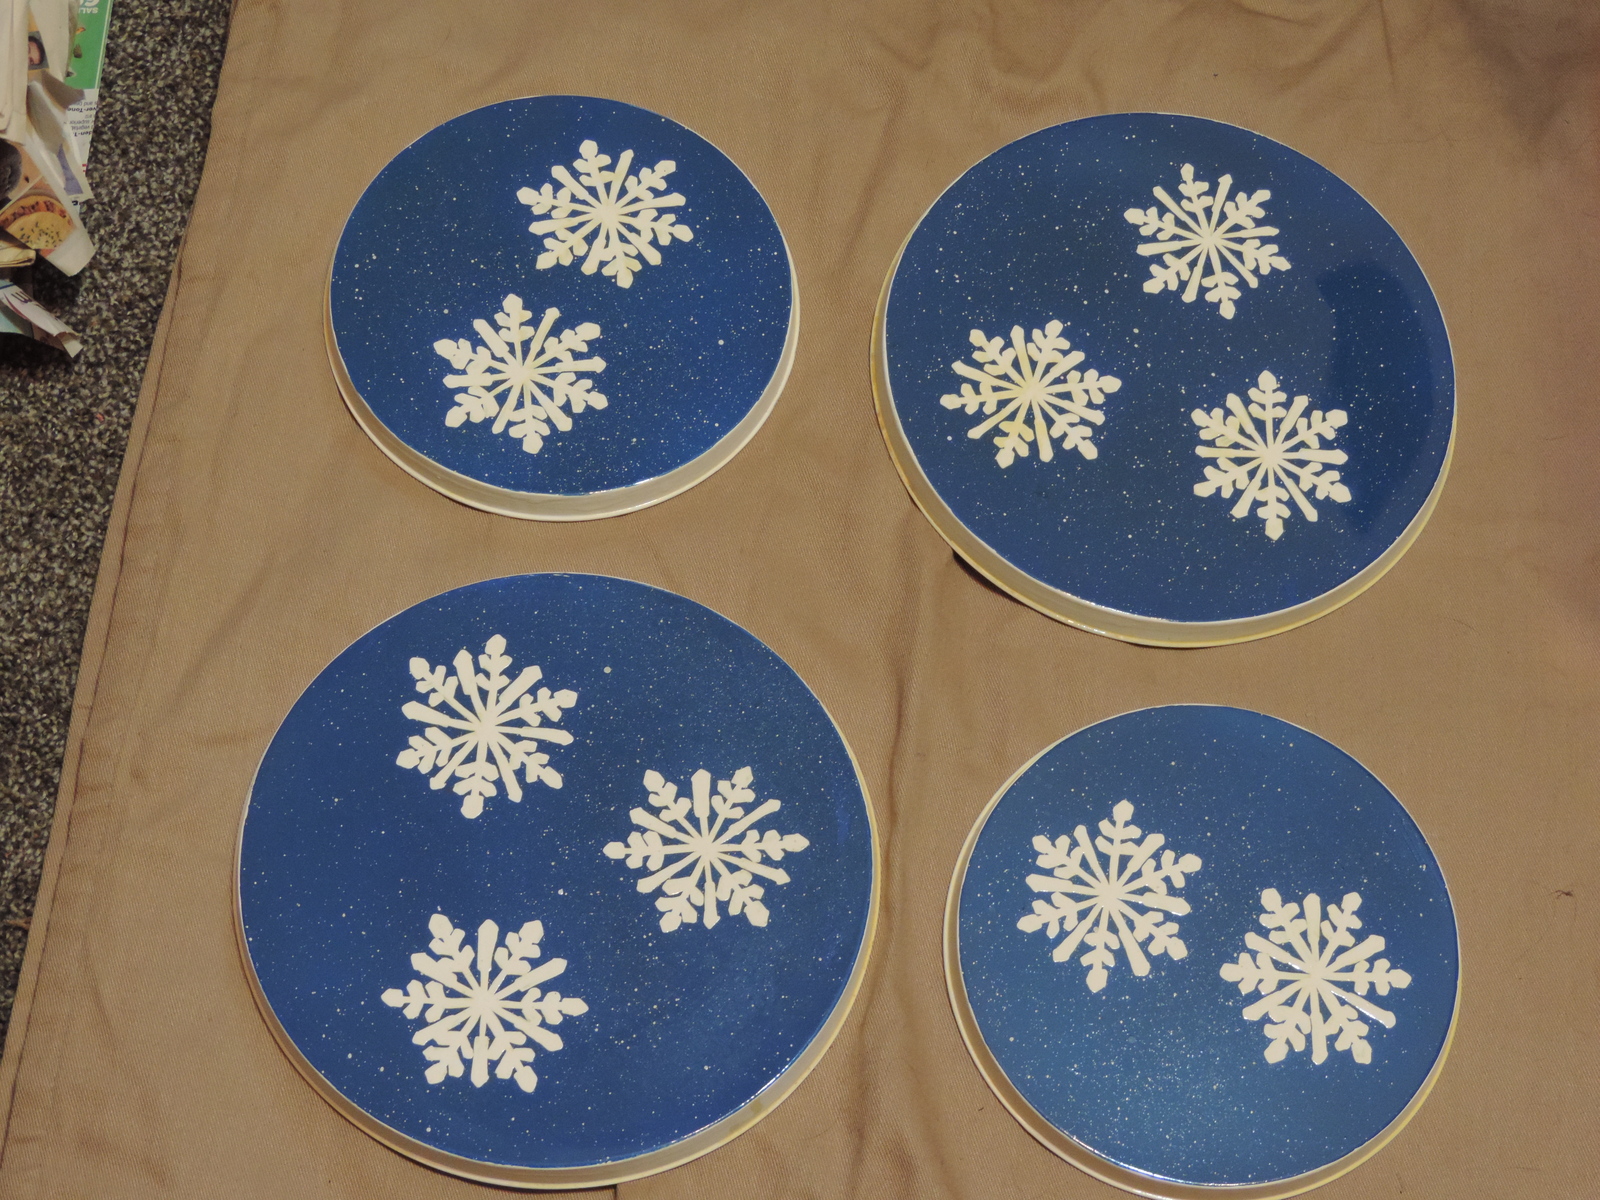 Creatice Christmas Stove Burner Covers for Small Space